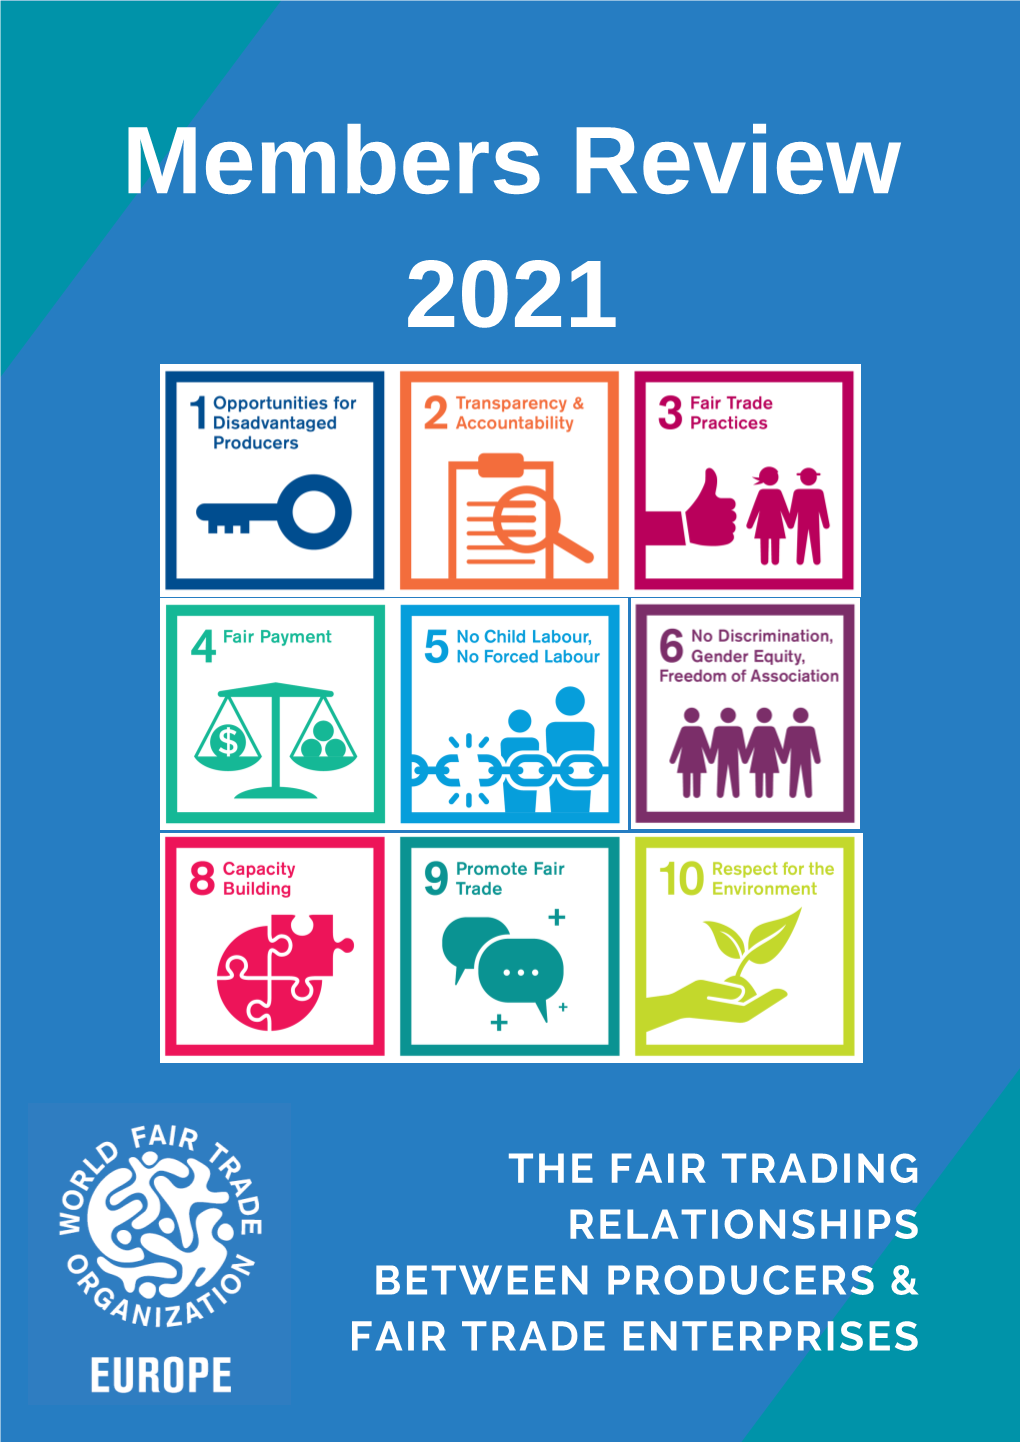 Members Review 2021 – the Fair Trading